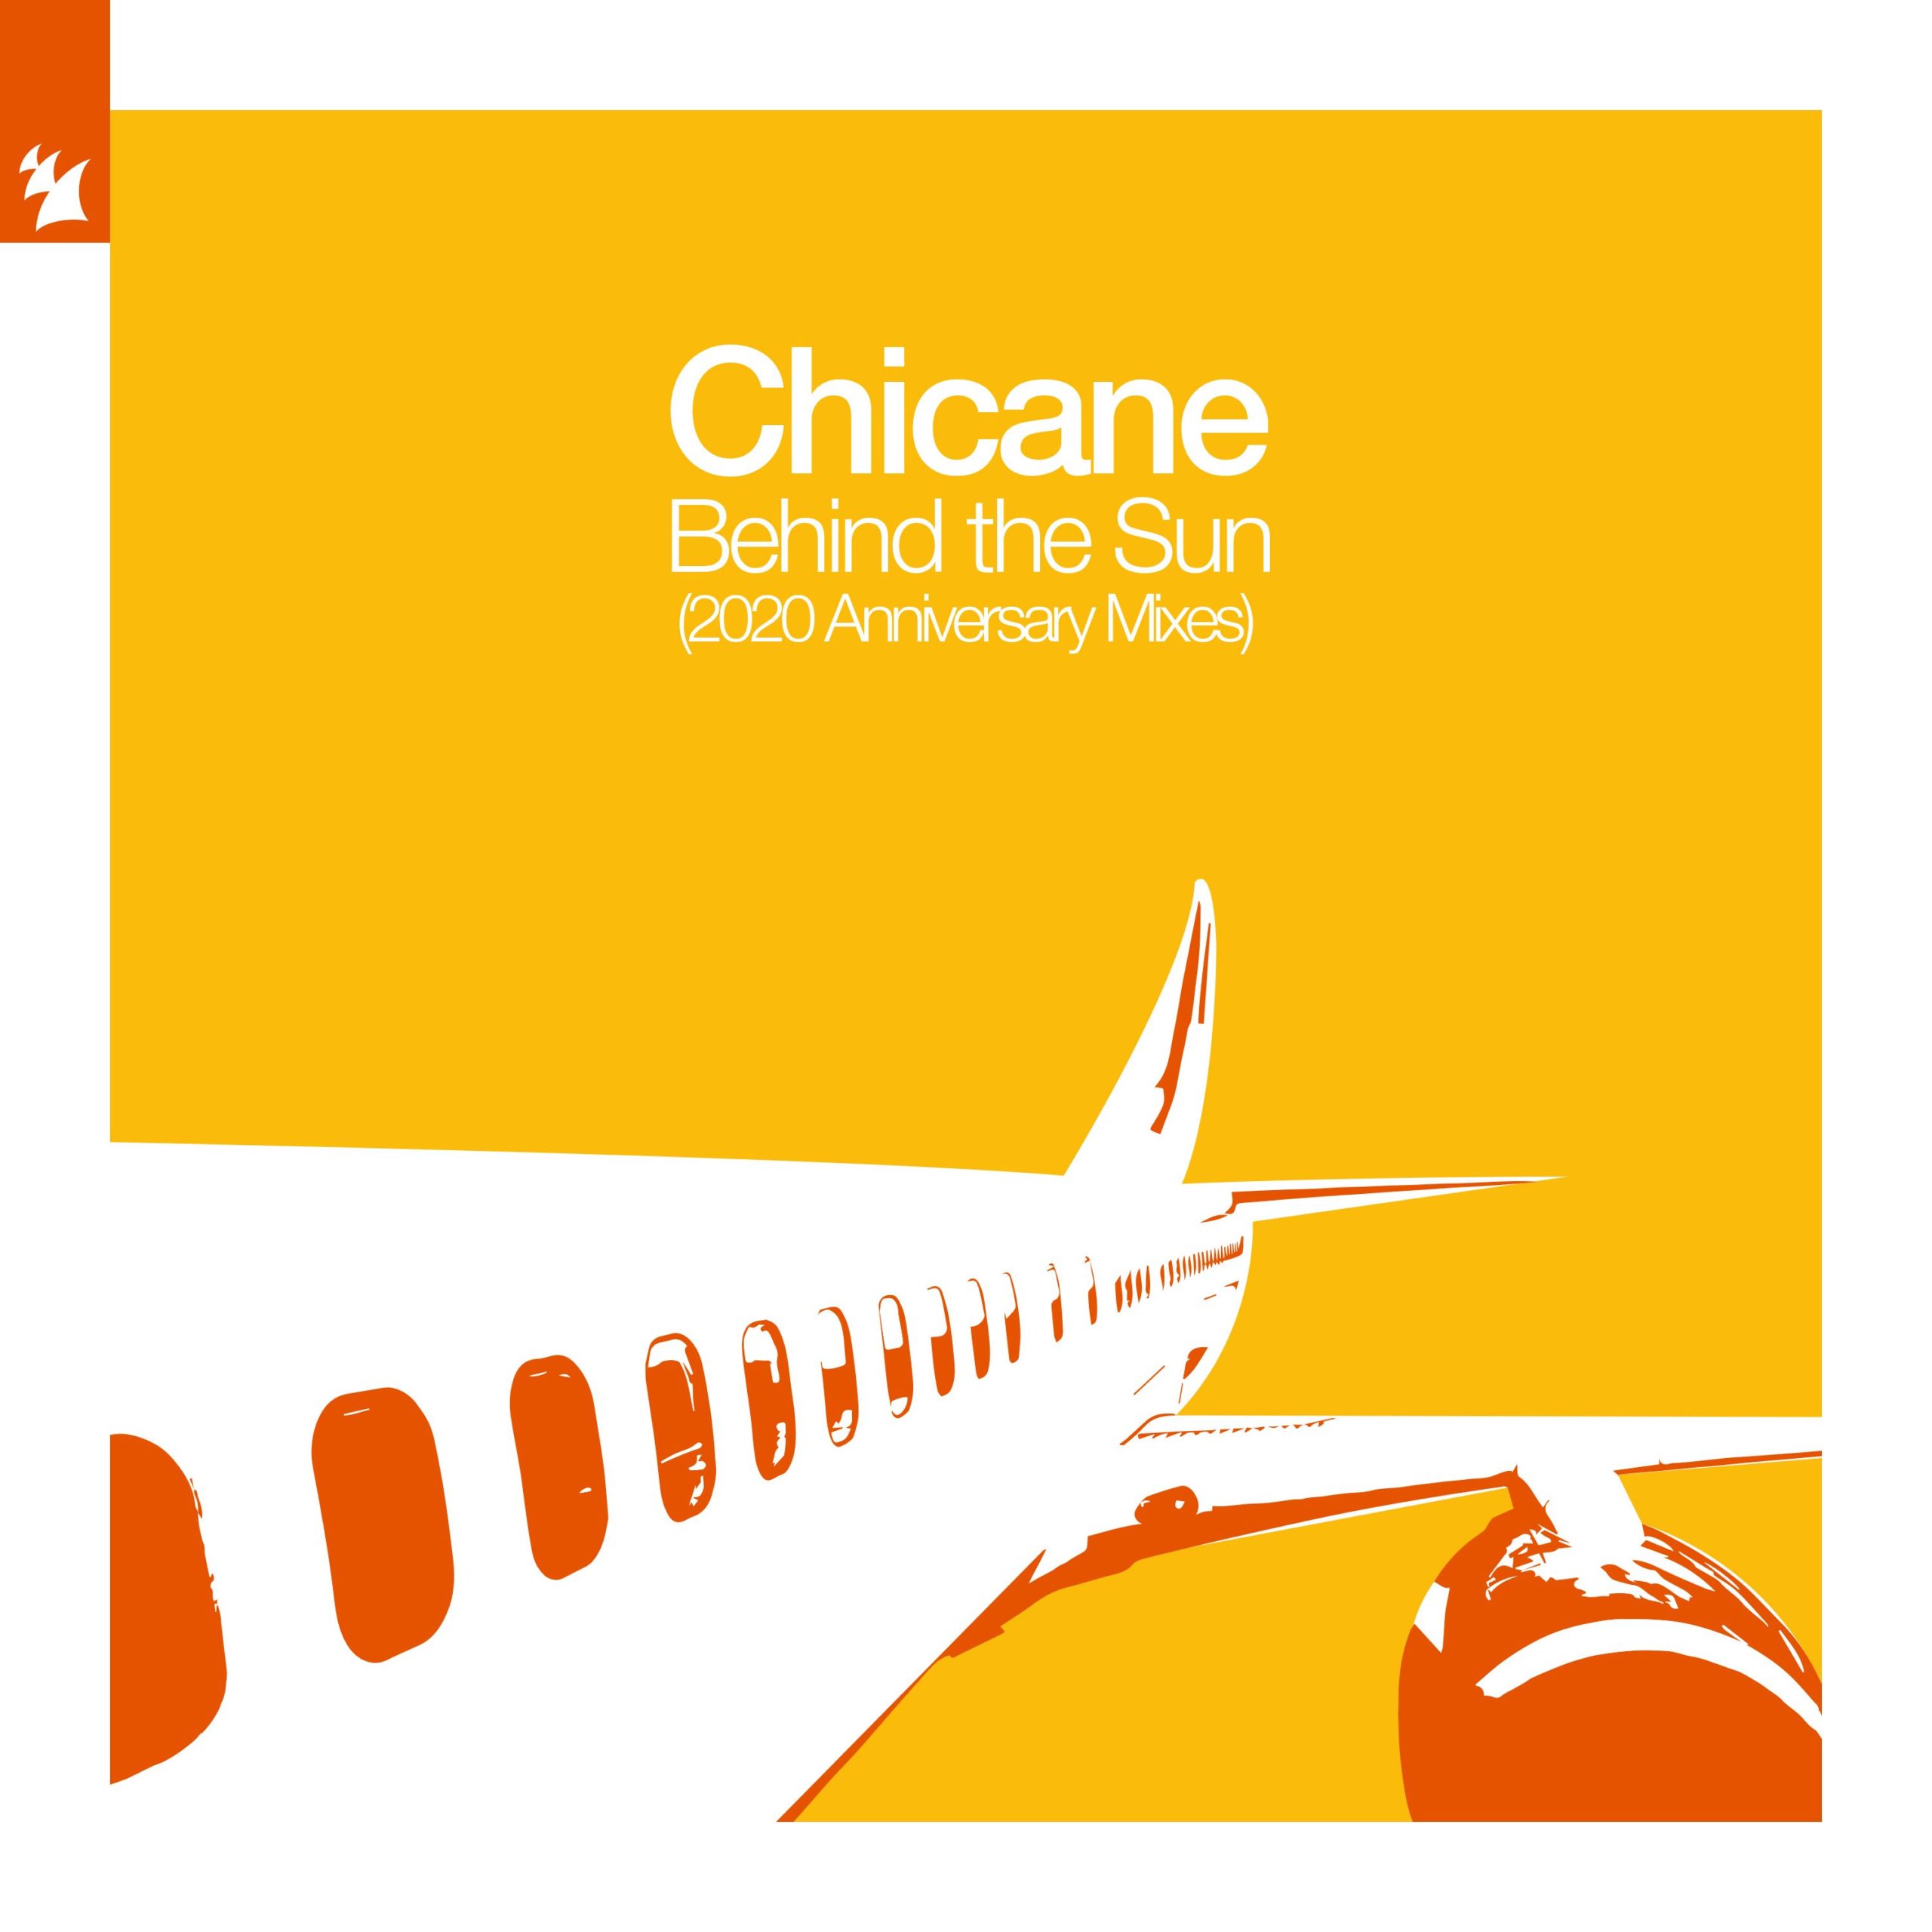 Chicane presents Behind The Sun (2020 Anniversary Mixes) on Armada Music